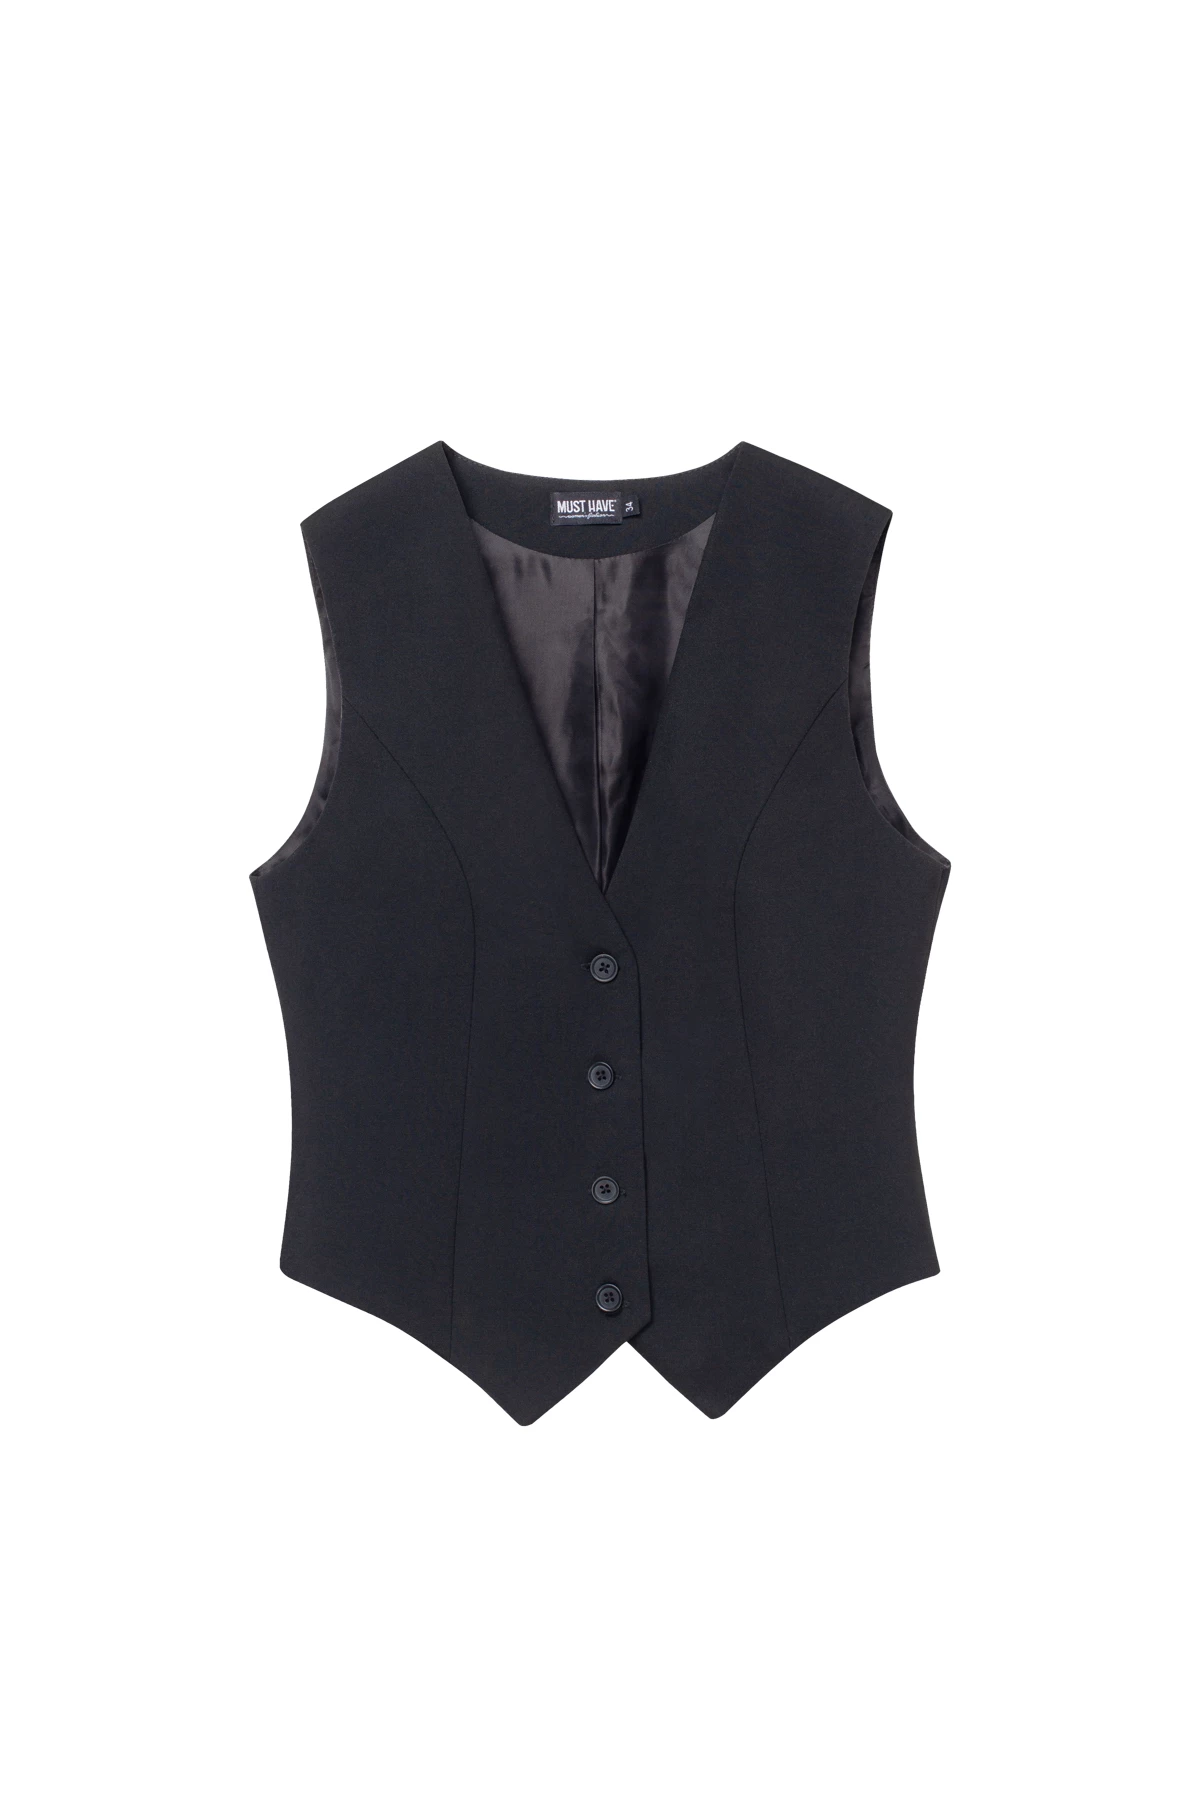 Black classic cut vest with viscose, art- 13606, 【MustHave ❤️】price - 1599 ₴